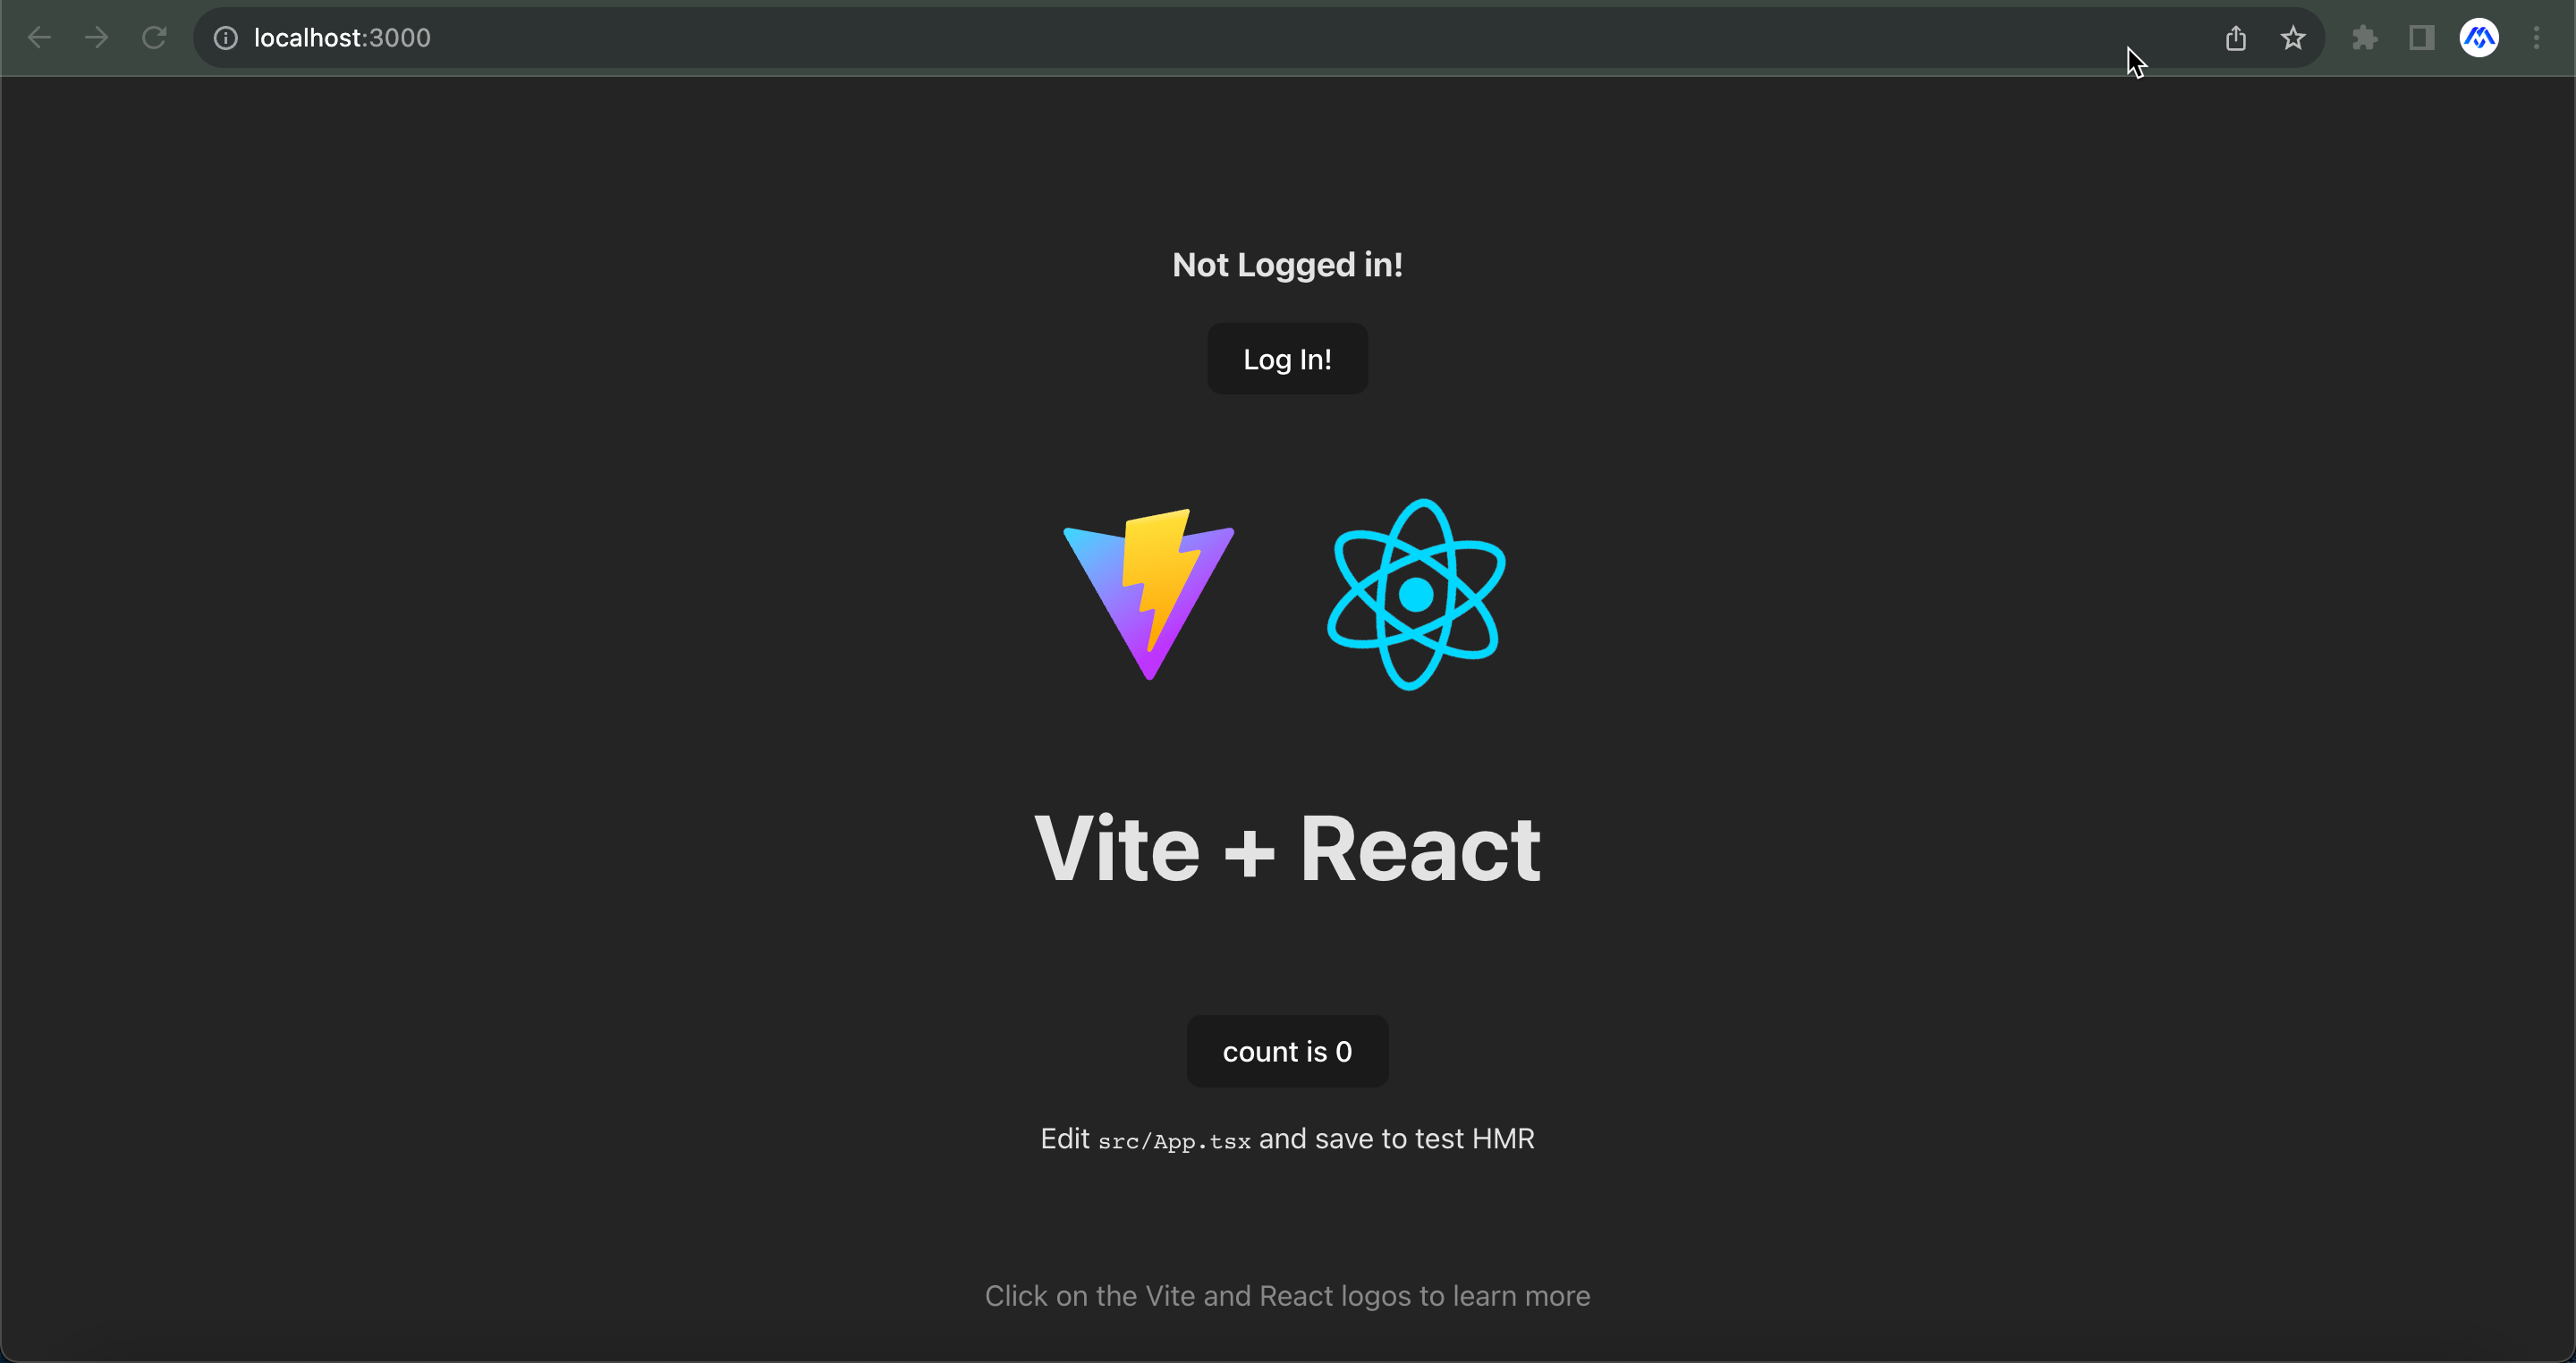 Vite react app running in the browser with login button